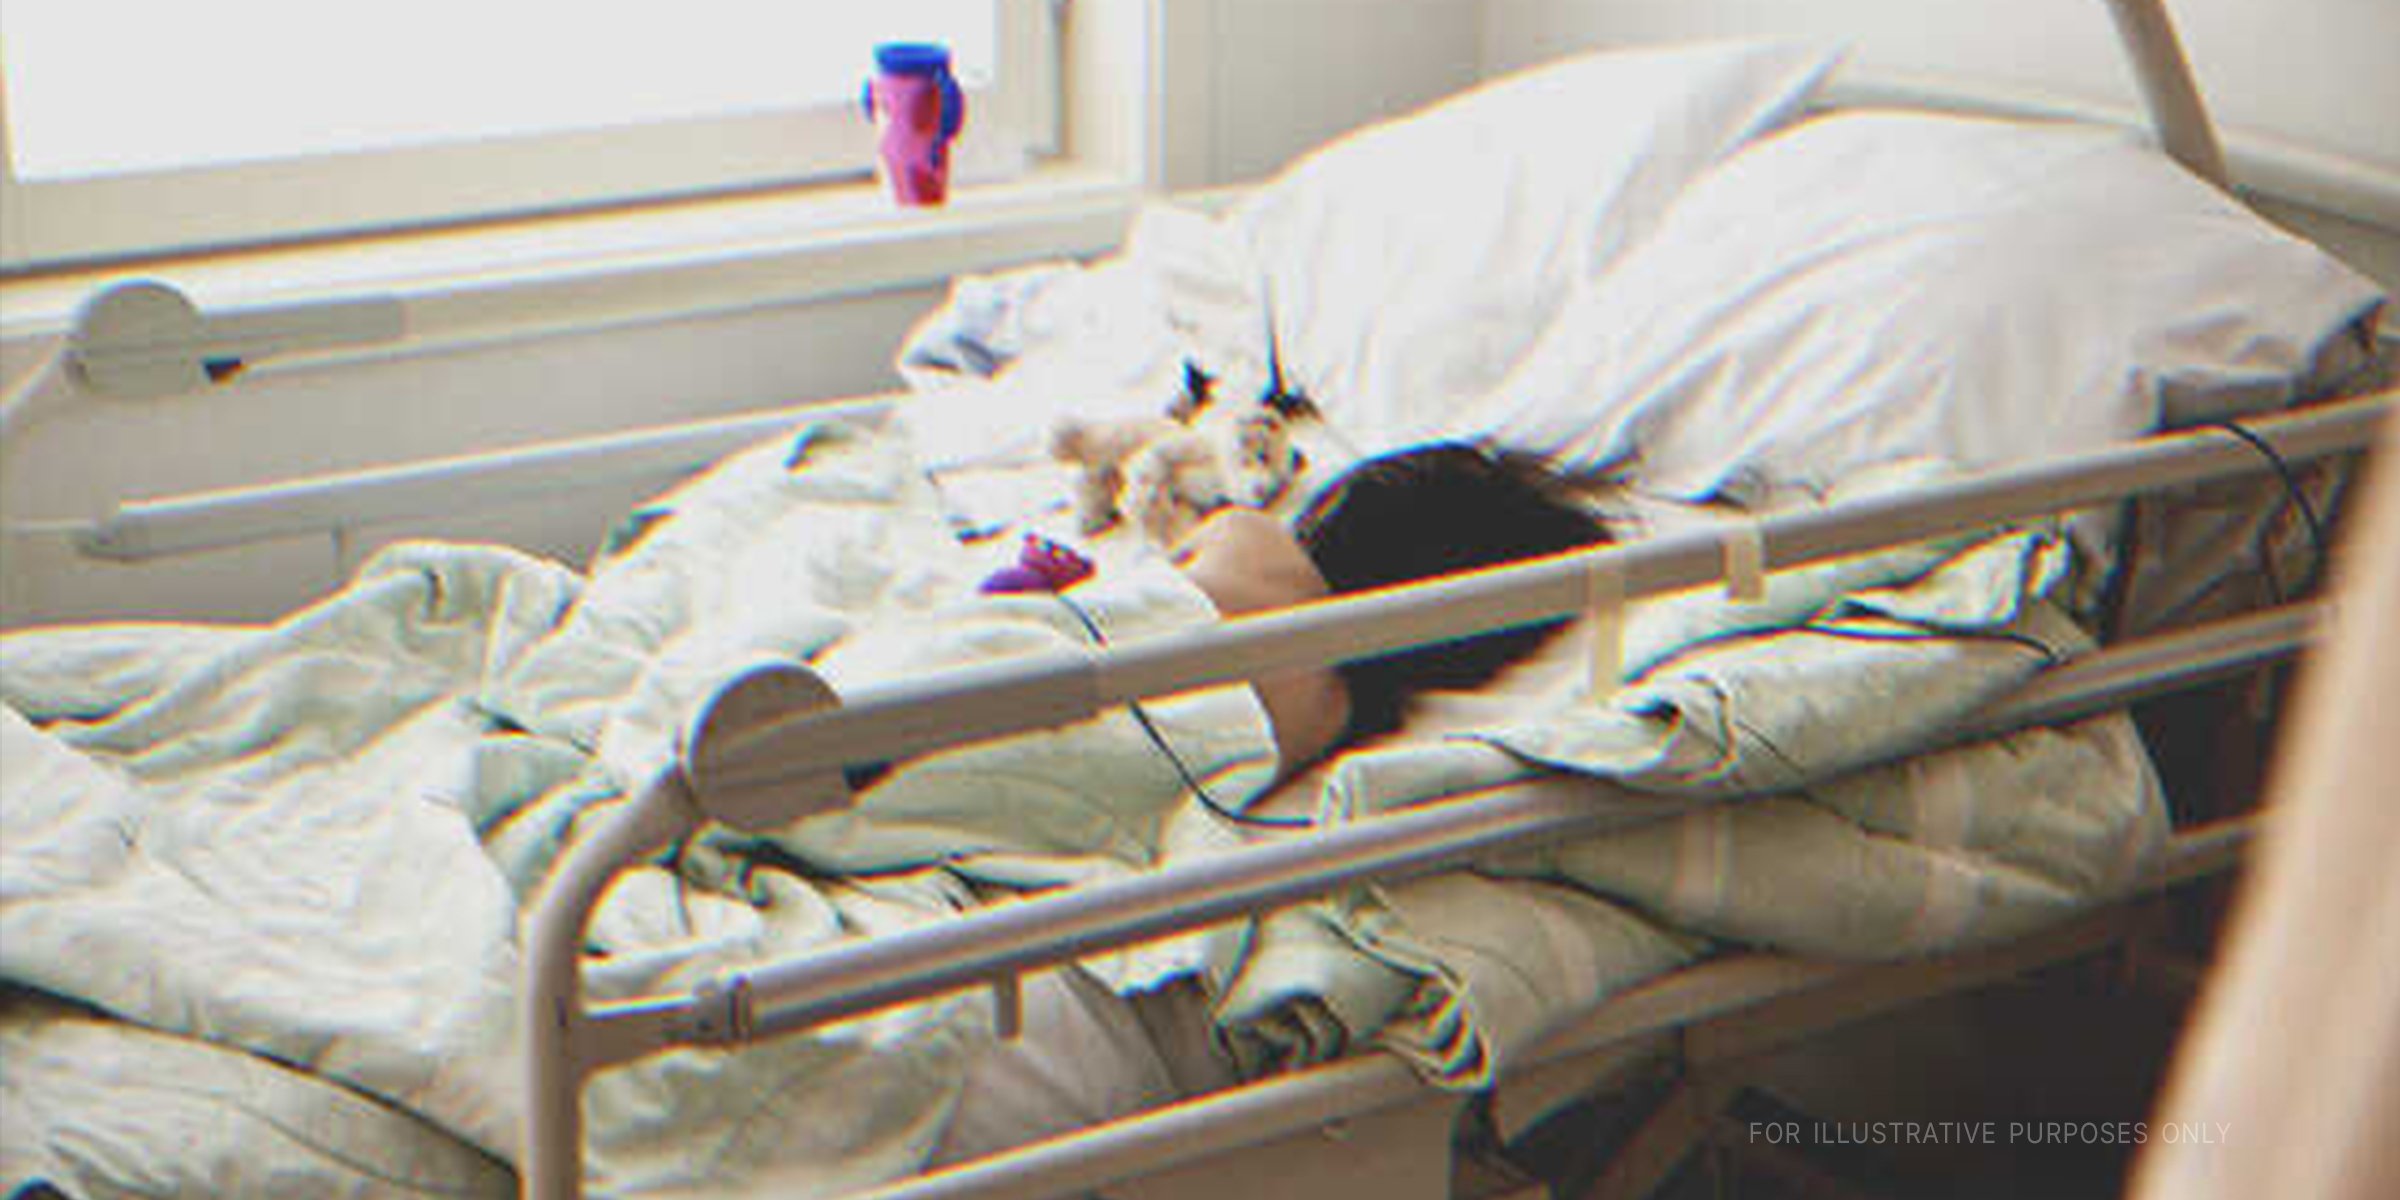 A sick child in a hospital bed. | Getty Images